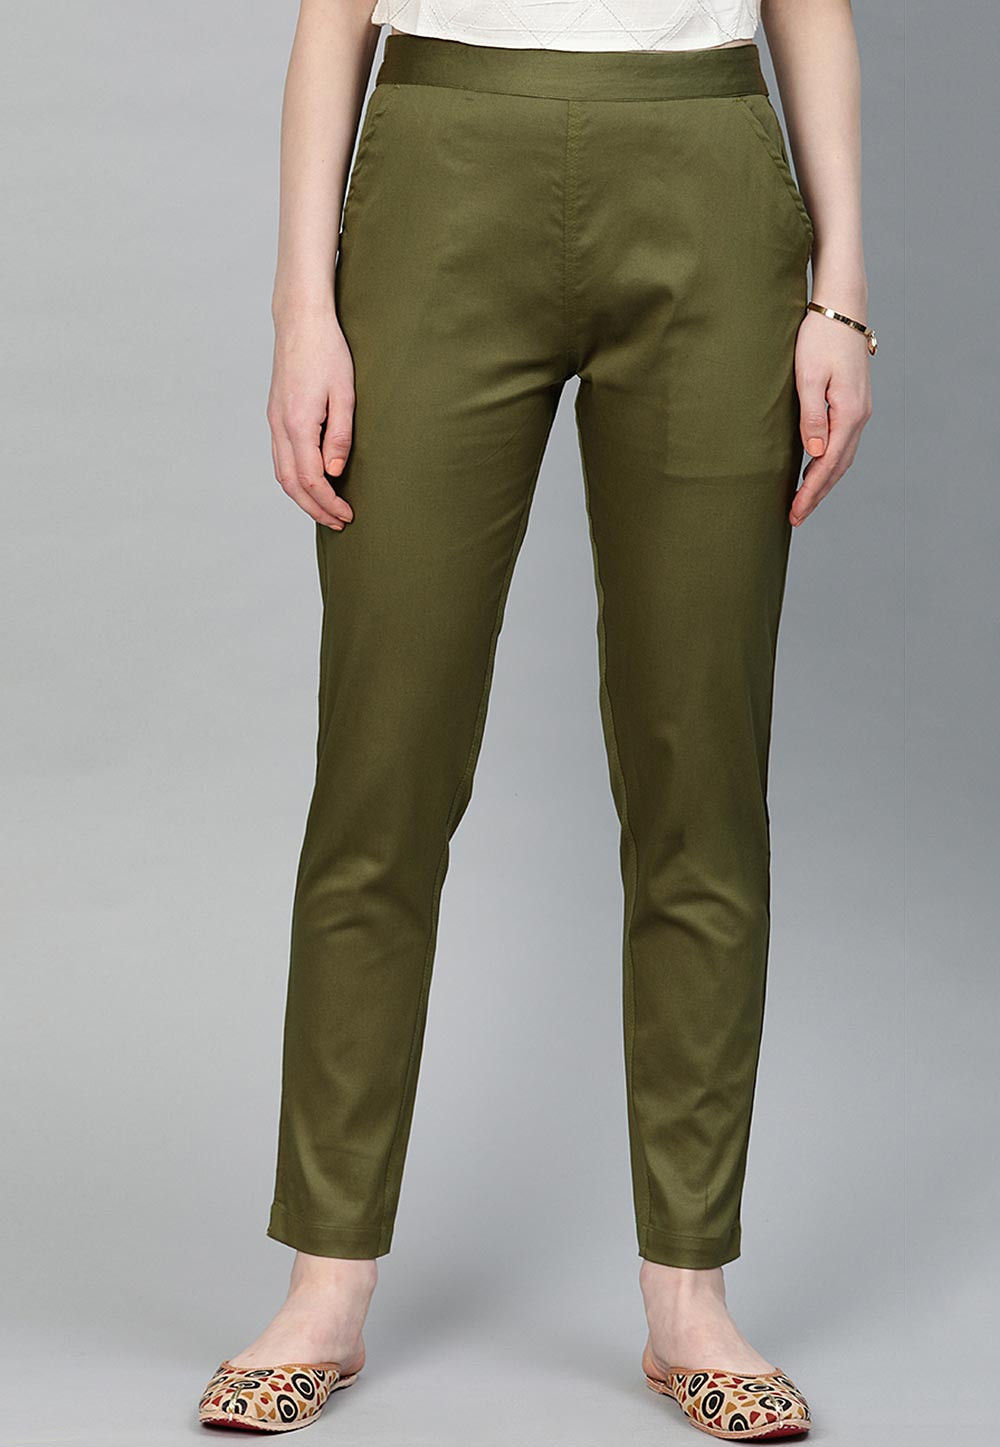 Aggregate 81+ olive green cotton pants best